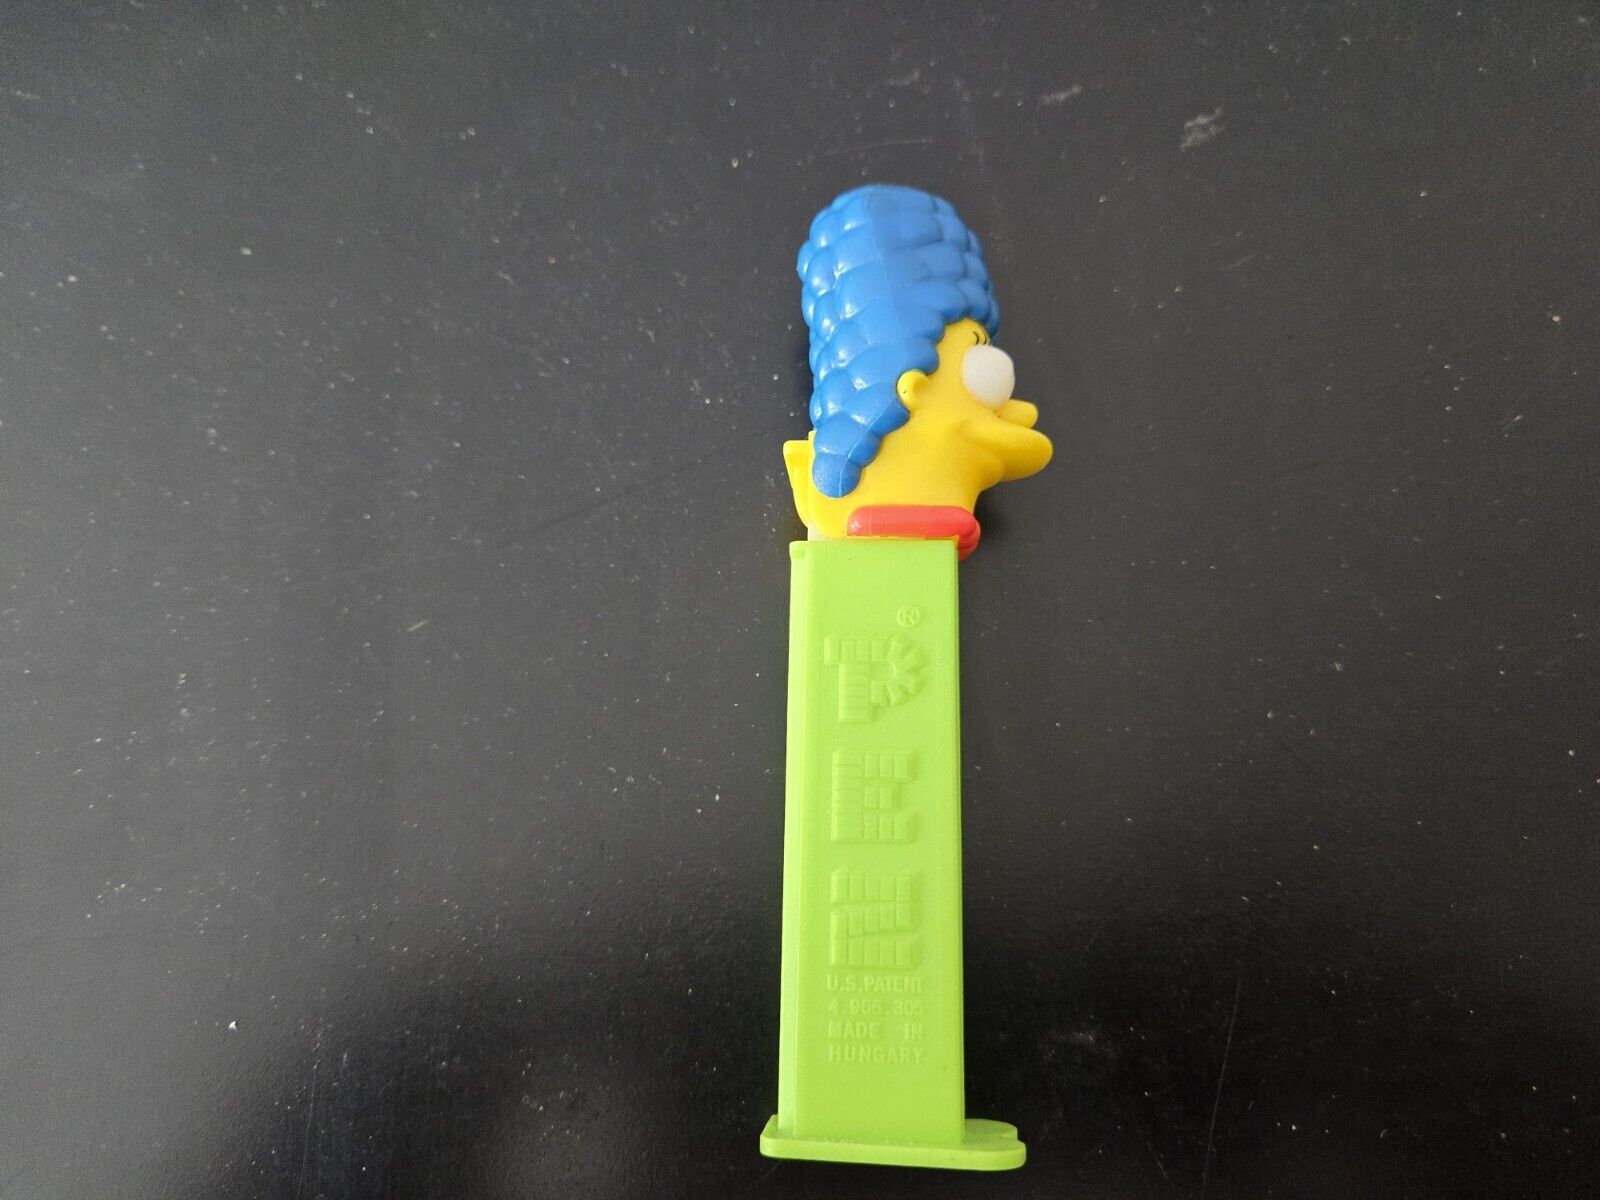 THE SIMPSON’S MARGE PEZ CONTAINER